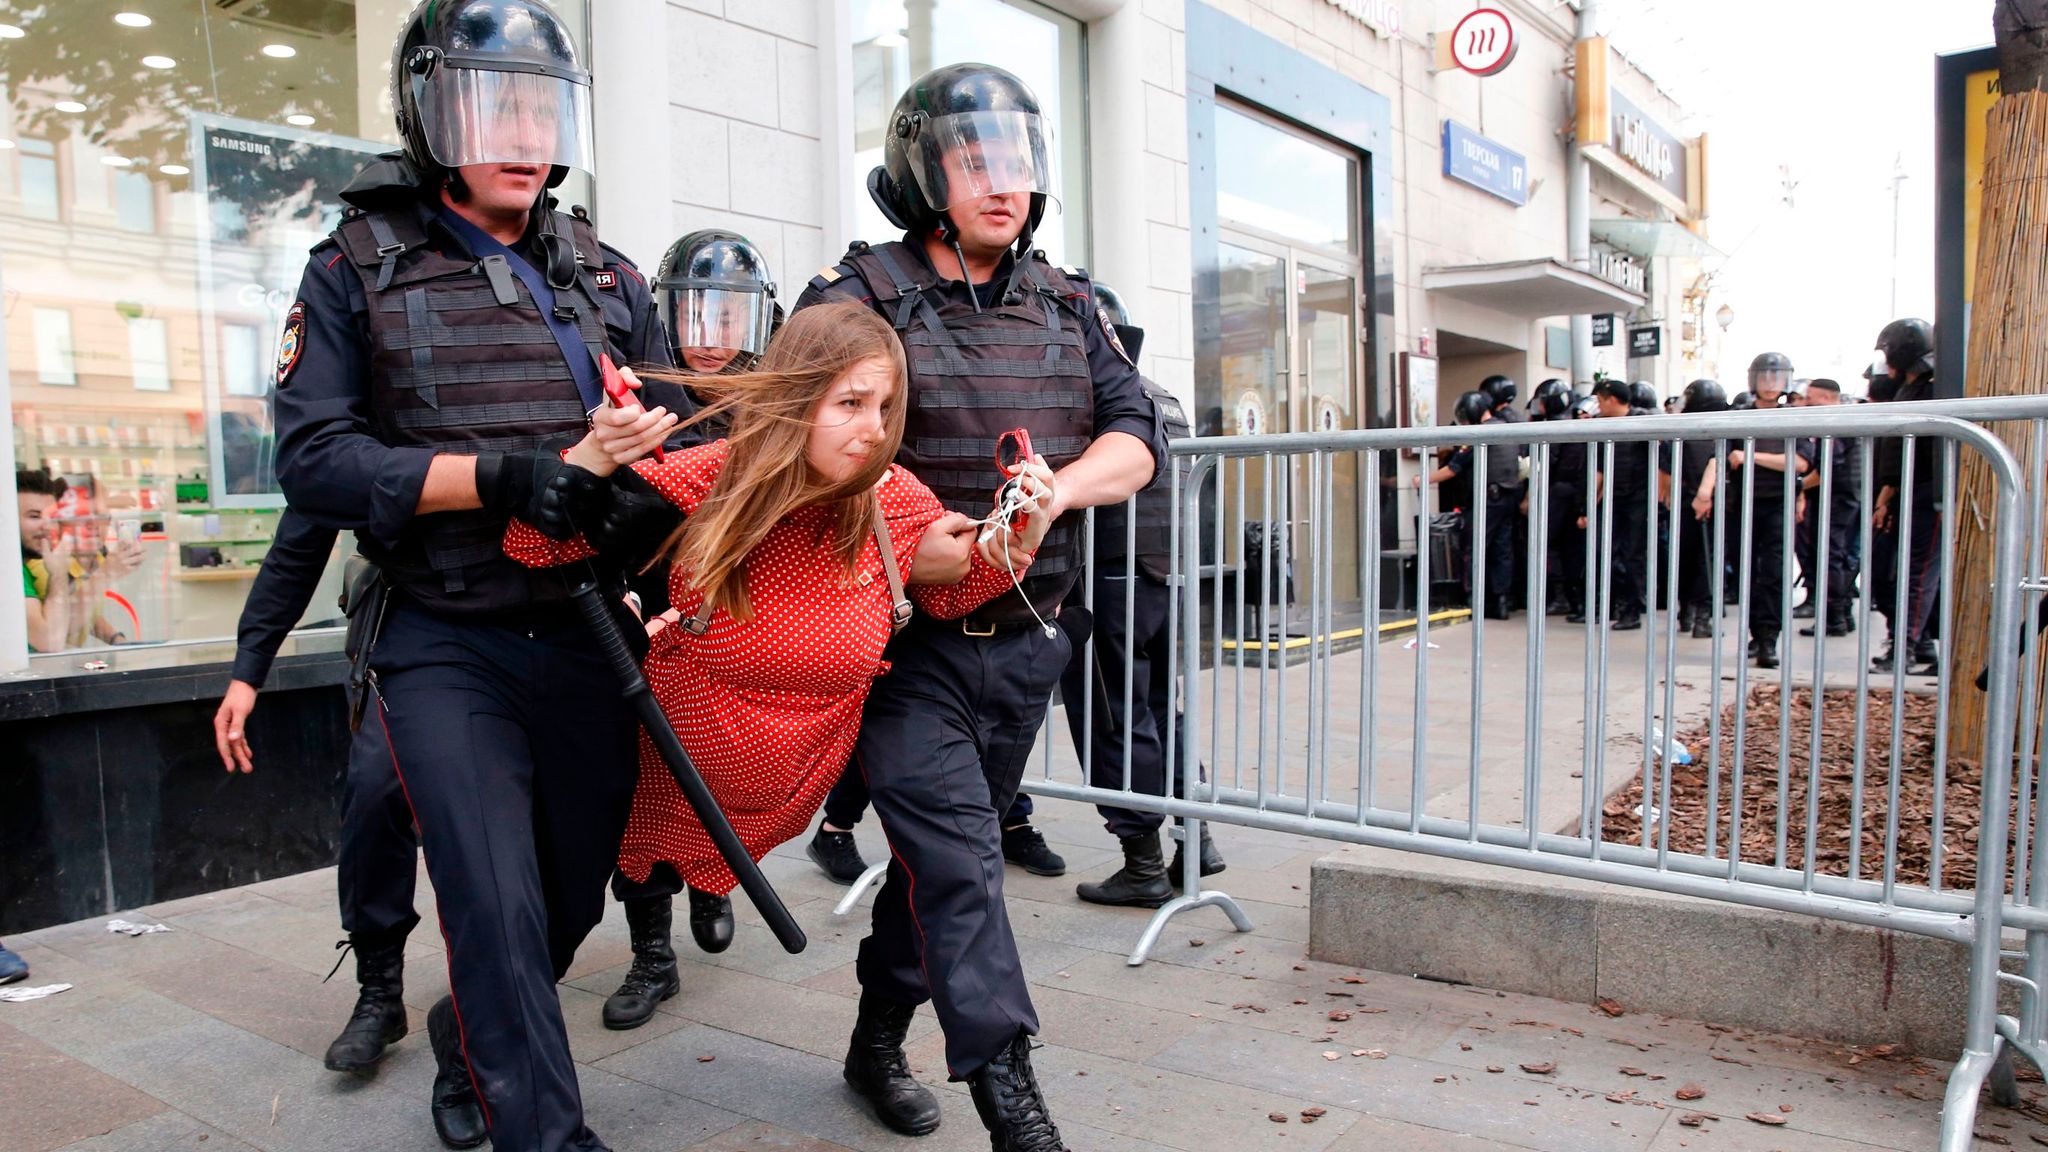 More than a thousand people were arrested in Moscow. 